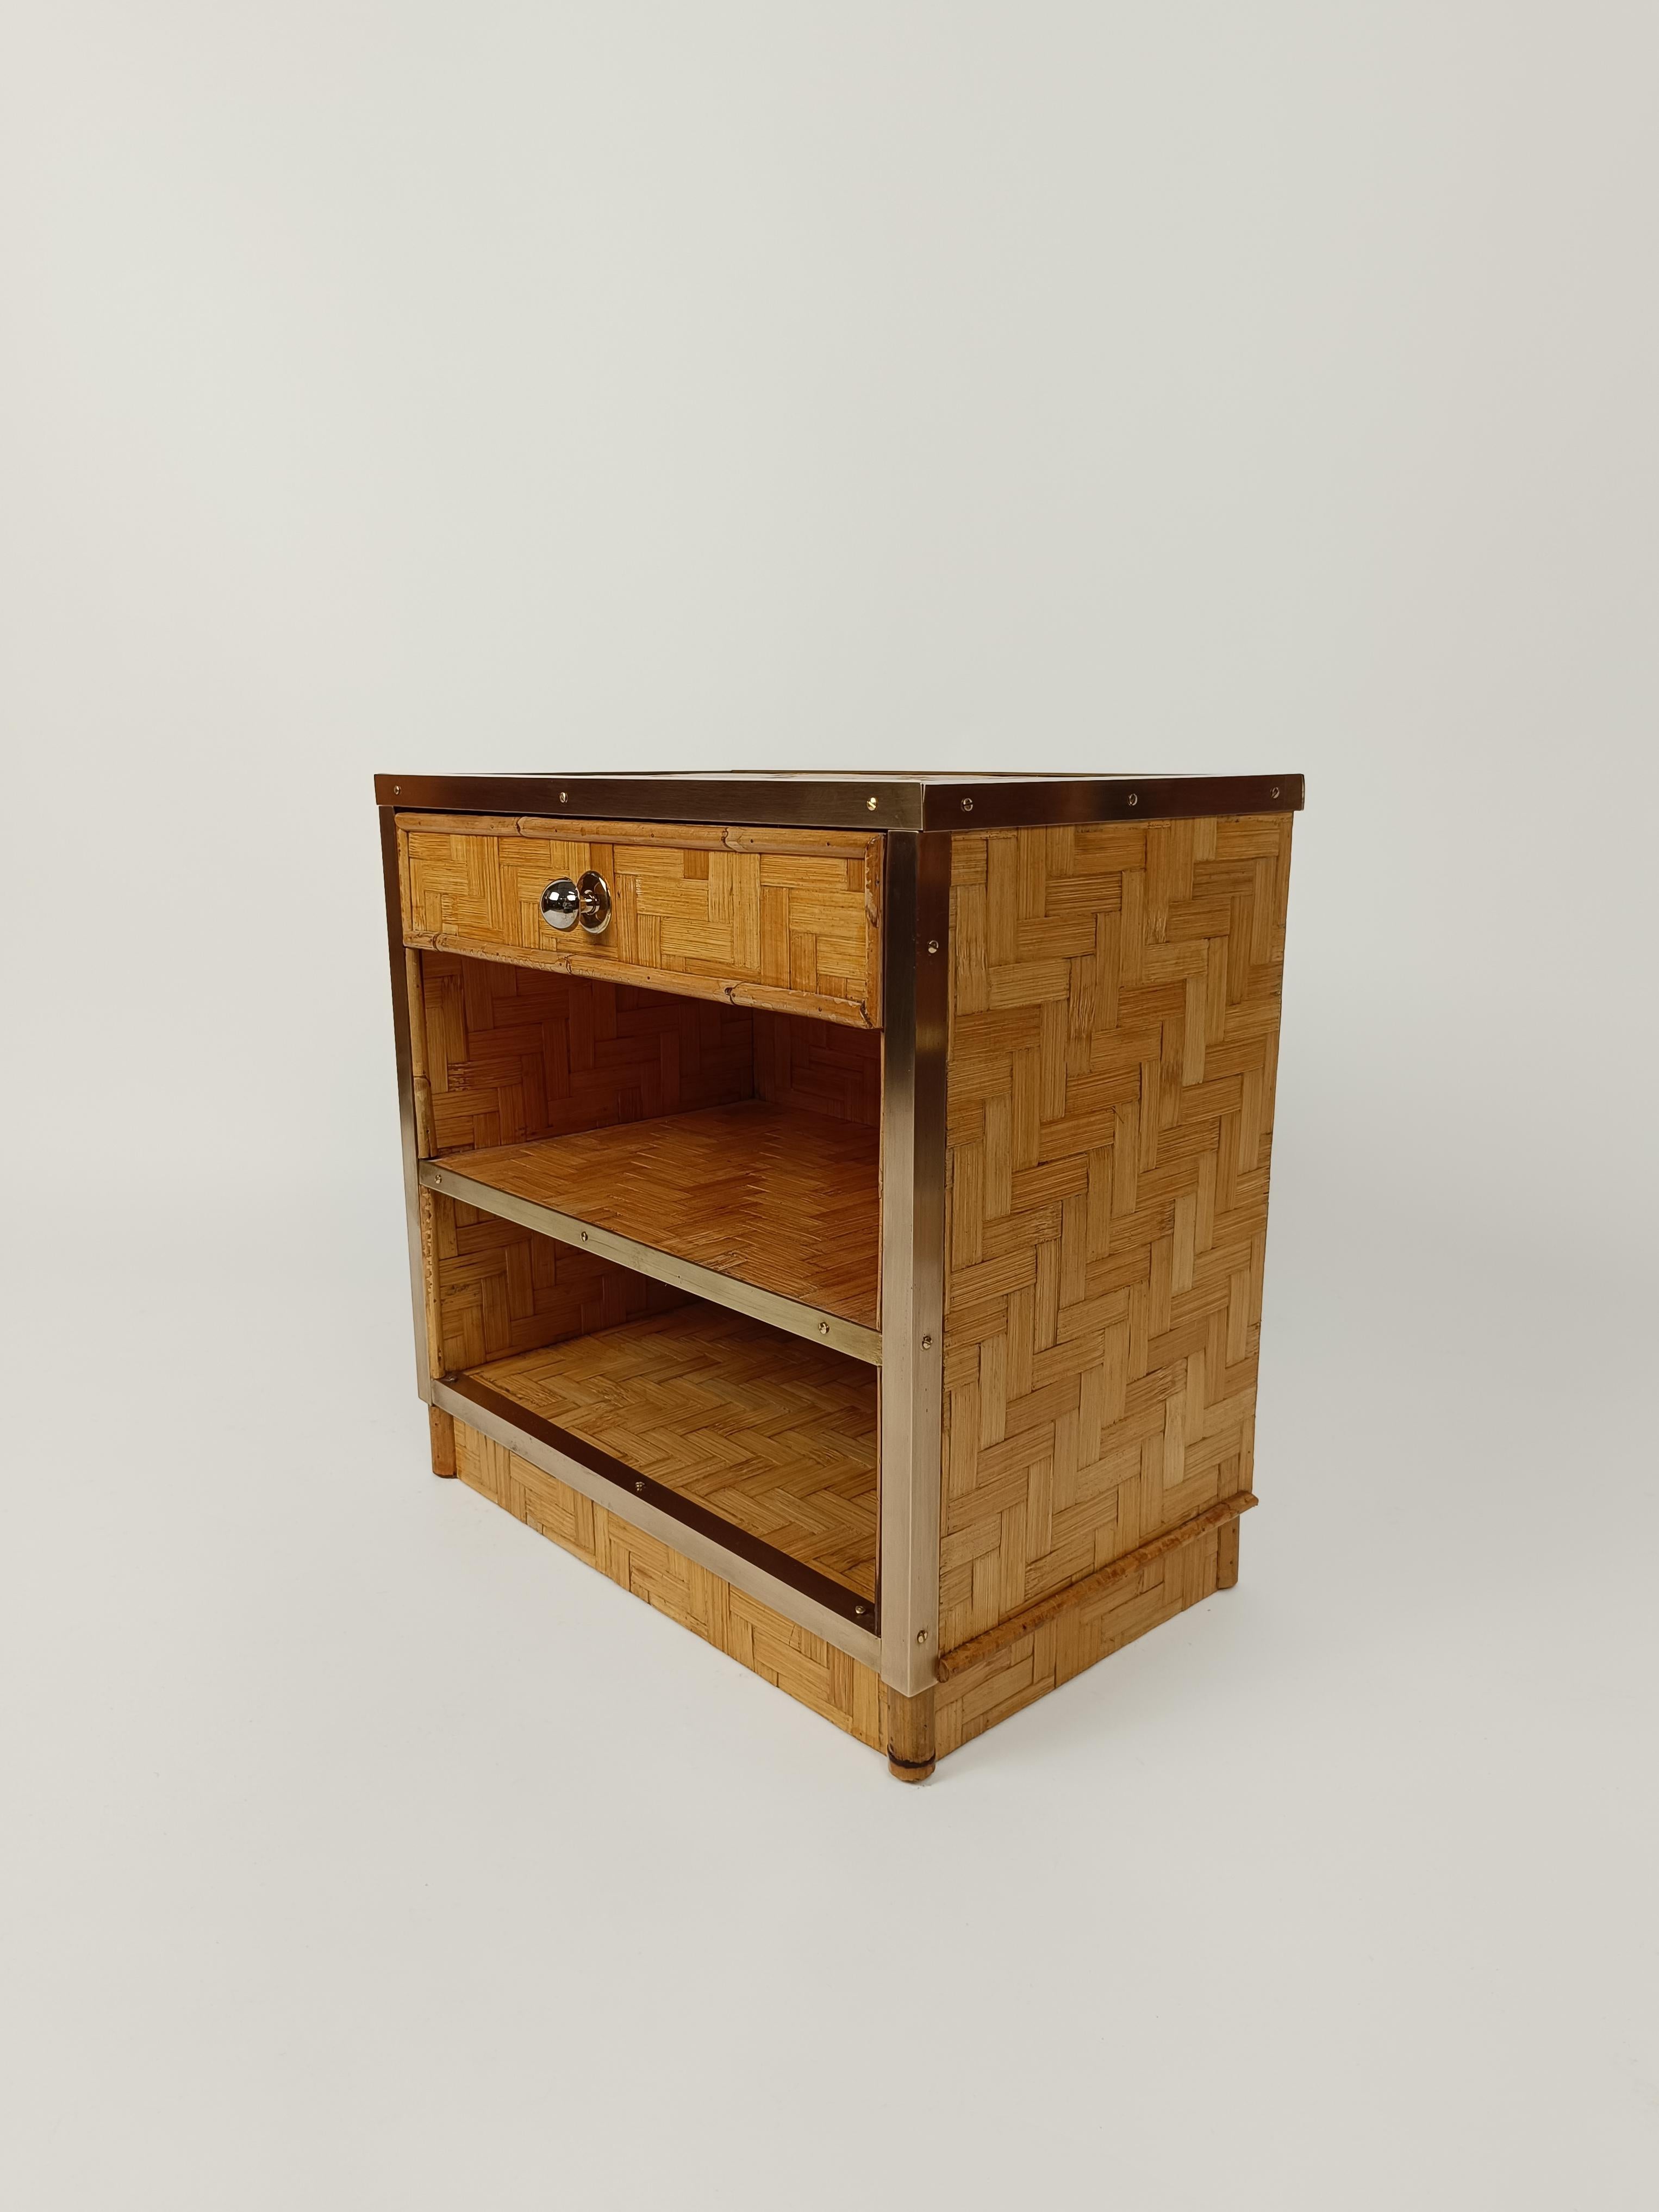 Midcentury Italian Bedside Tables in Bamboo Cane, Rattan and Brass, 1970s For Sale 4